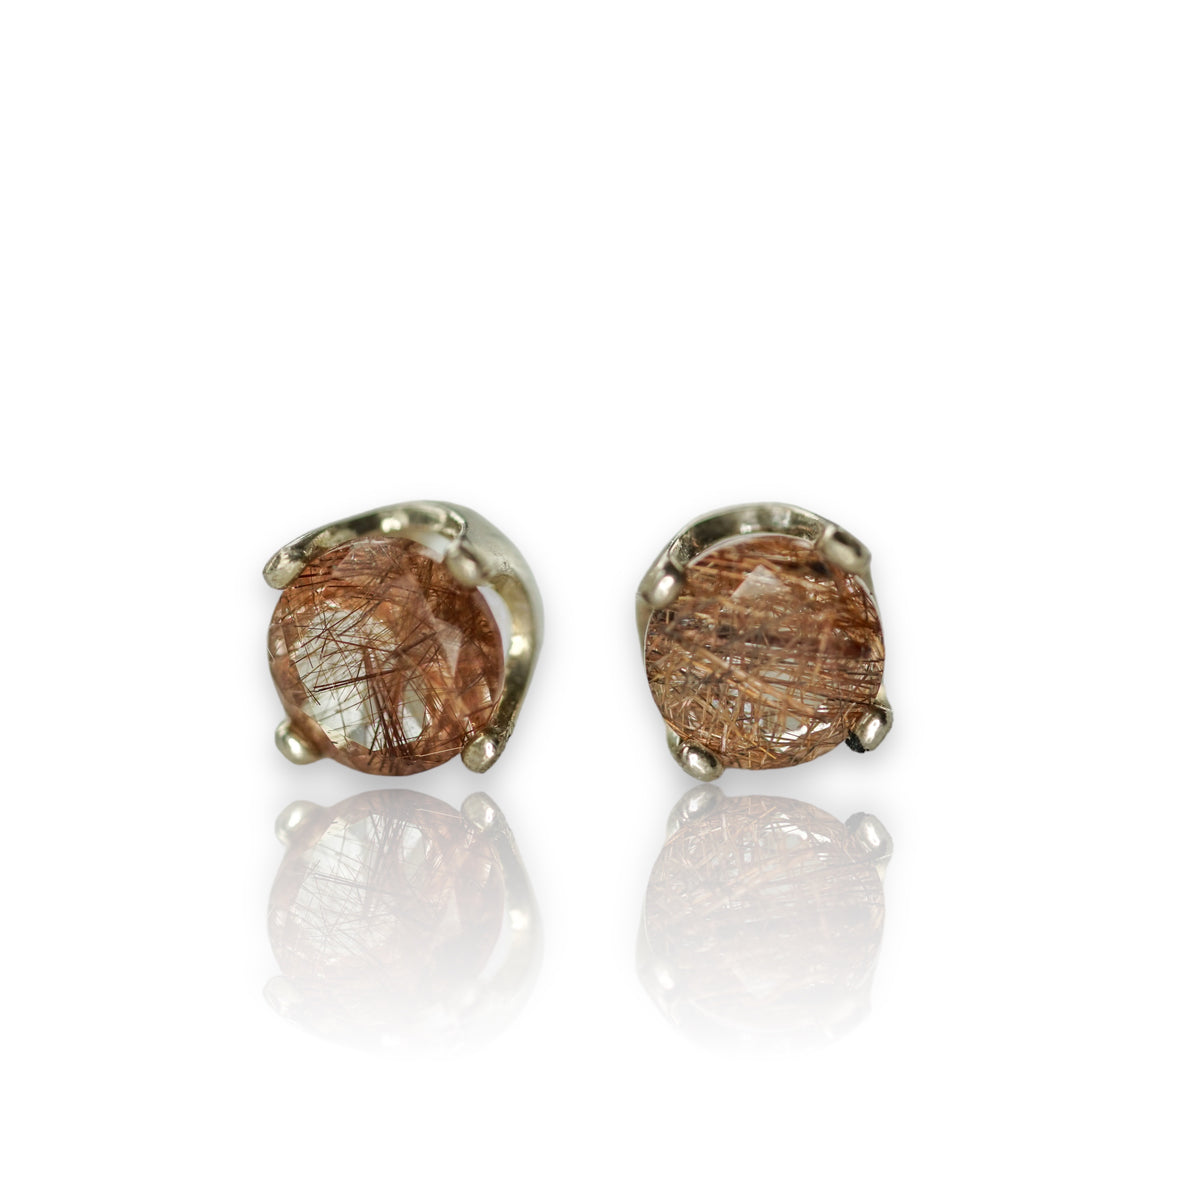 Rutilated Quartz small earrings in sterling silver